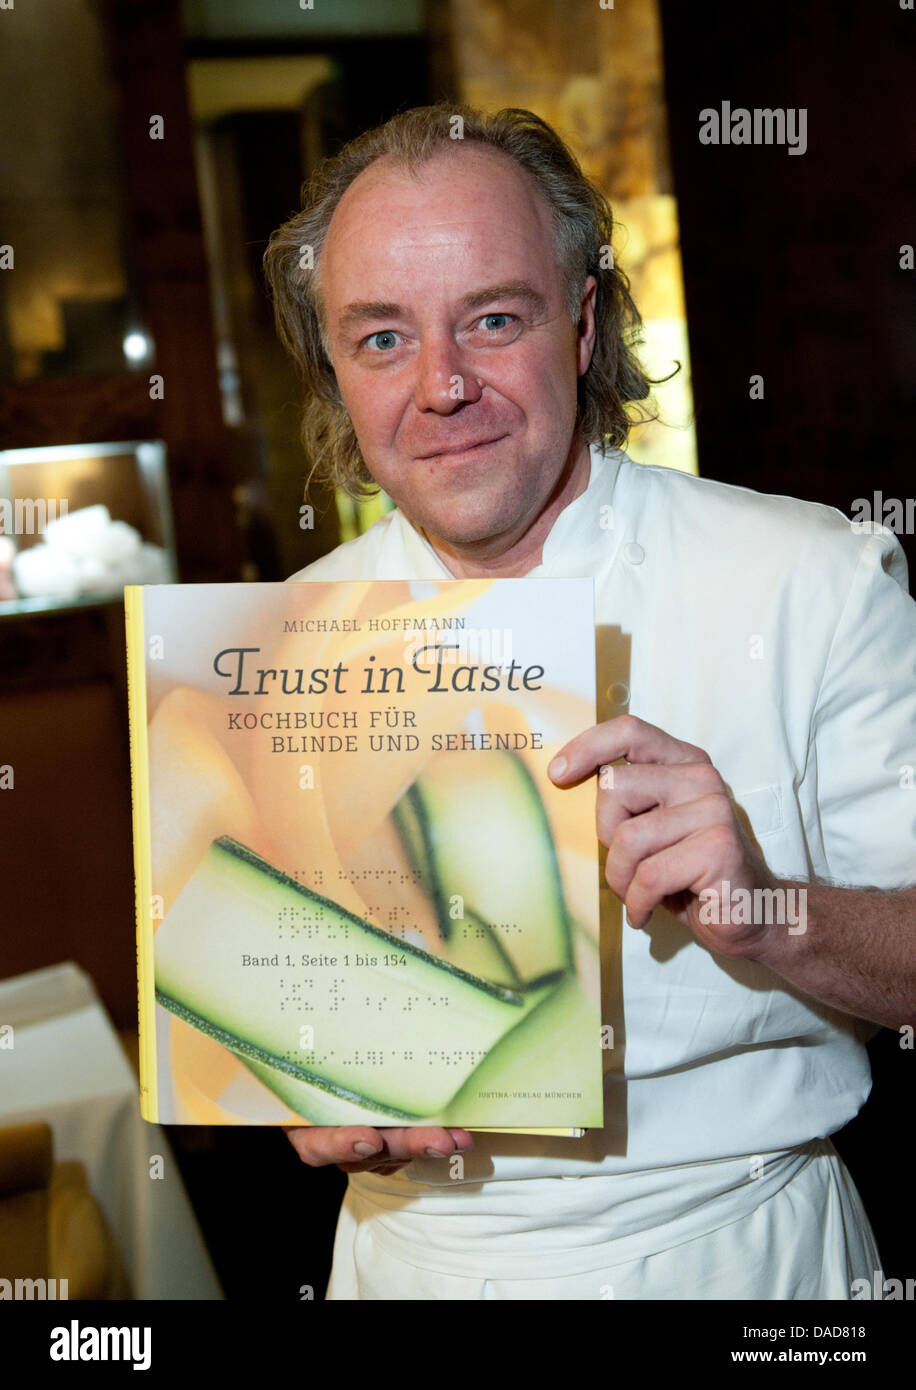 The Michelin-starred chef Michael Hoffmann poses during the presentation of the cookbook  'Trust in Taste - Kochbuch fuer Blinde und Sehende' ('Cookbook for blind and sighted persons') inside the kitchen of the restaurant Margaux in Berlin, Germany, 11 October 2011. The recipes are printed in black letters for sighted readers as well as in contracted Braille printed onto the food p Stock Photo